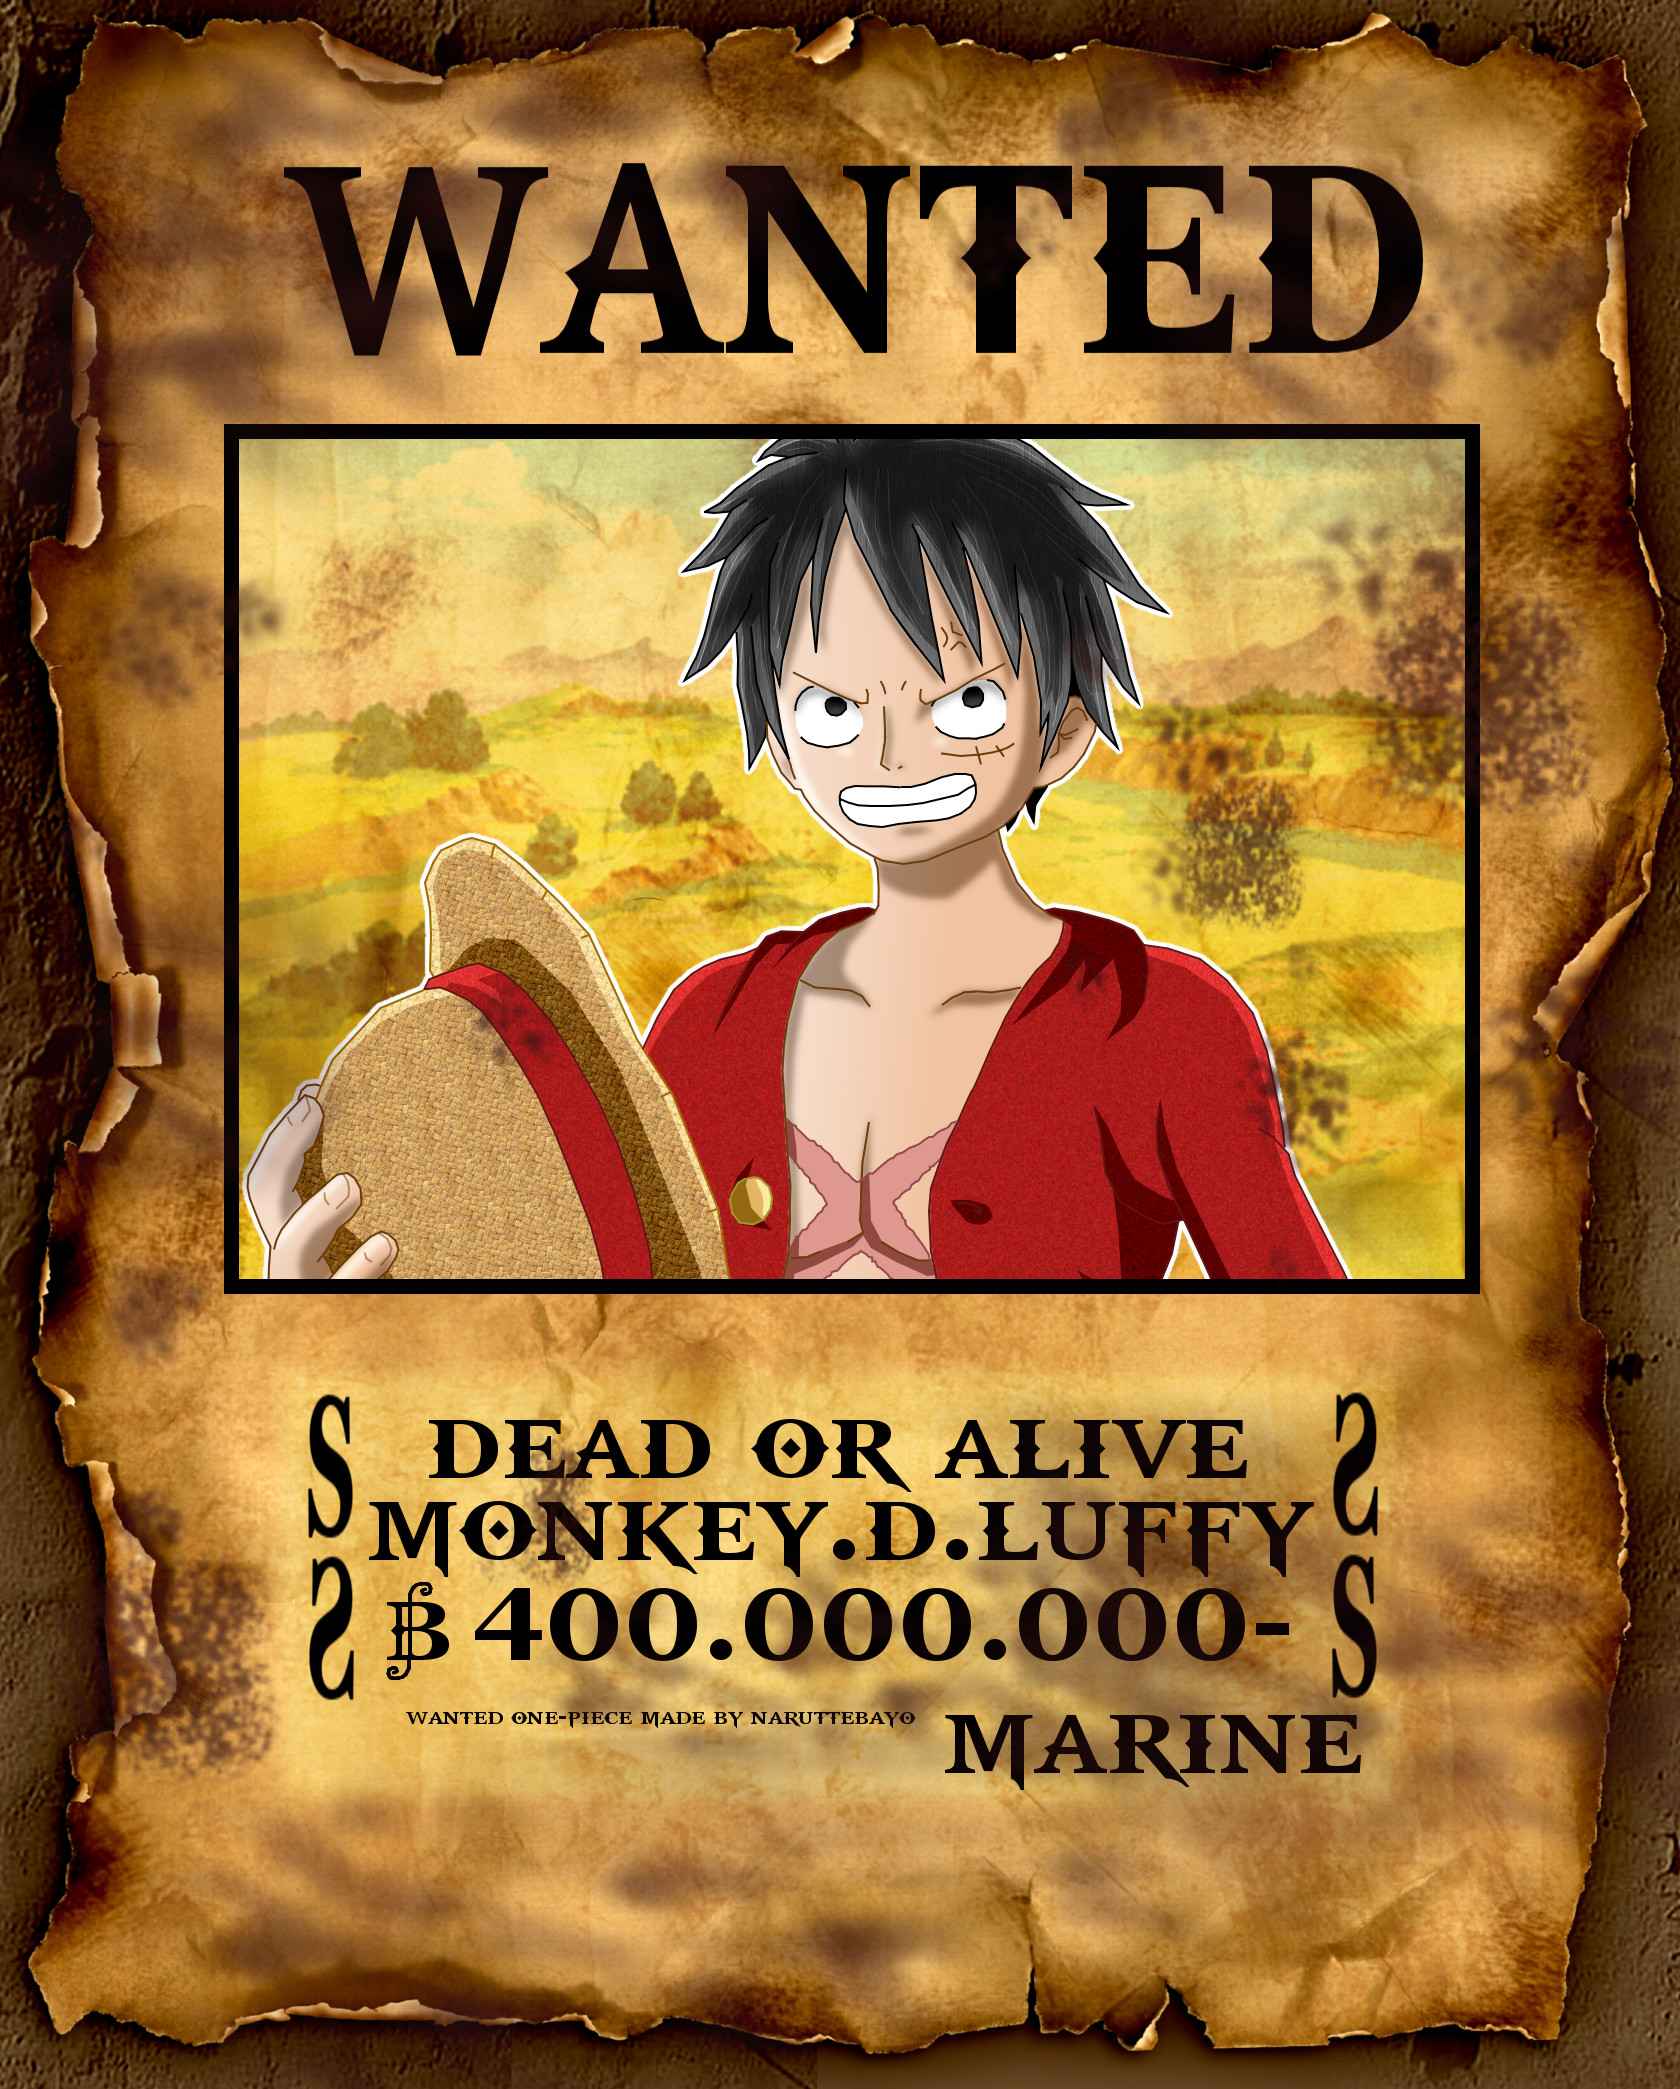 One Piece Wanted Poster Font One Piece Wanted Poster A3 | Images and ...